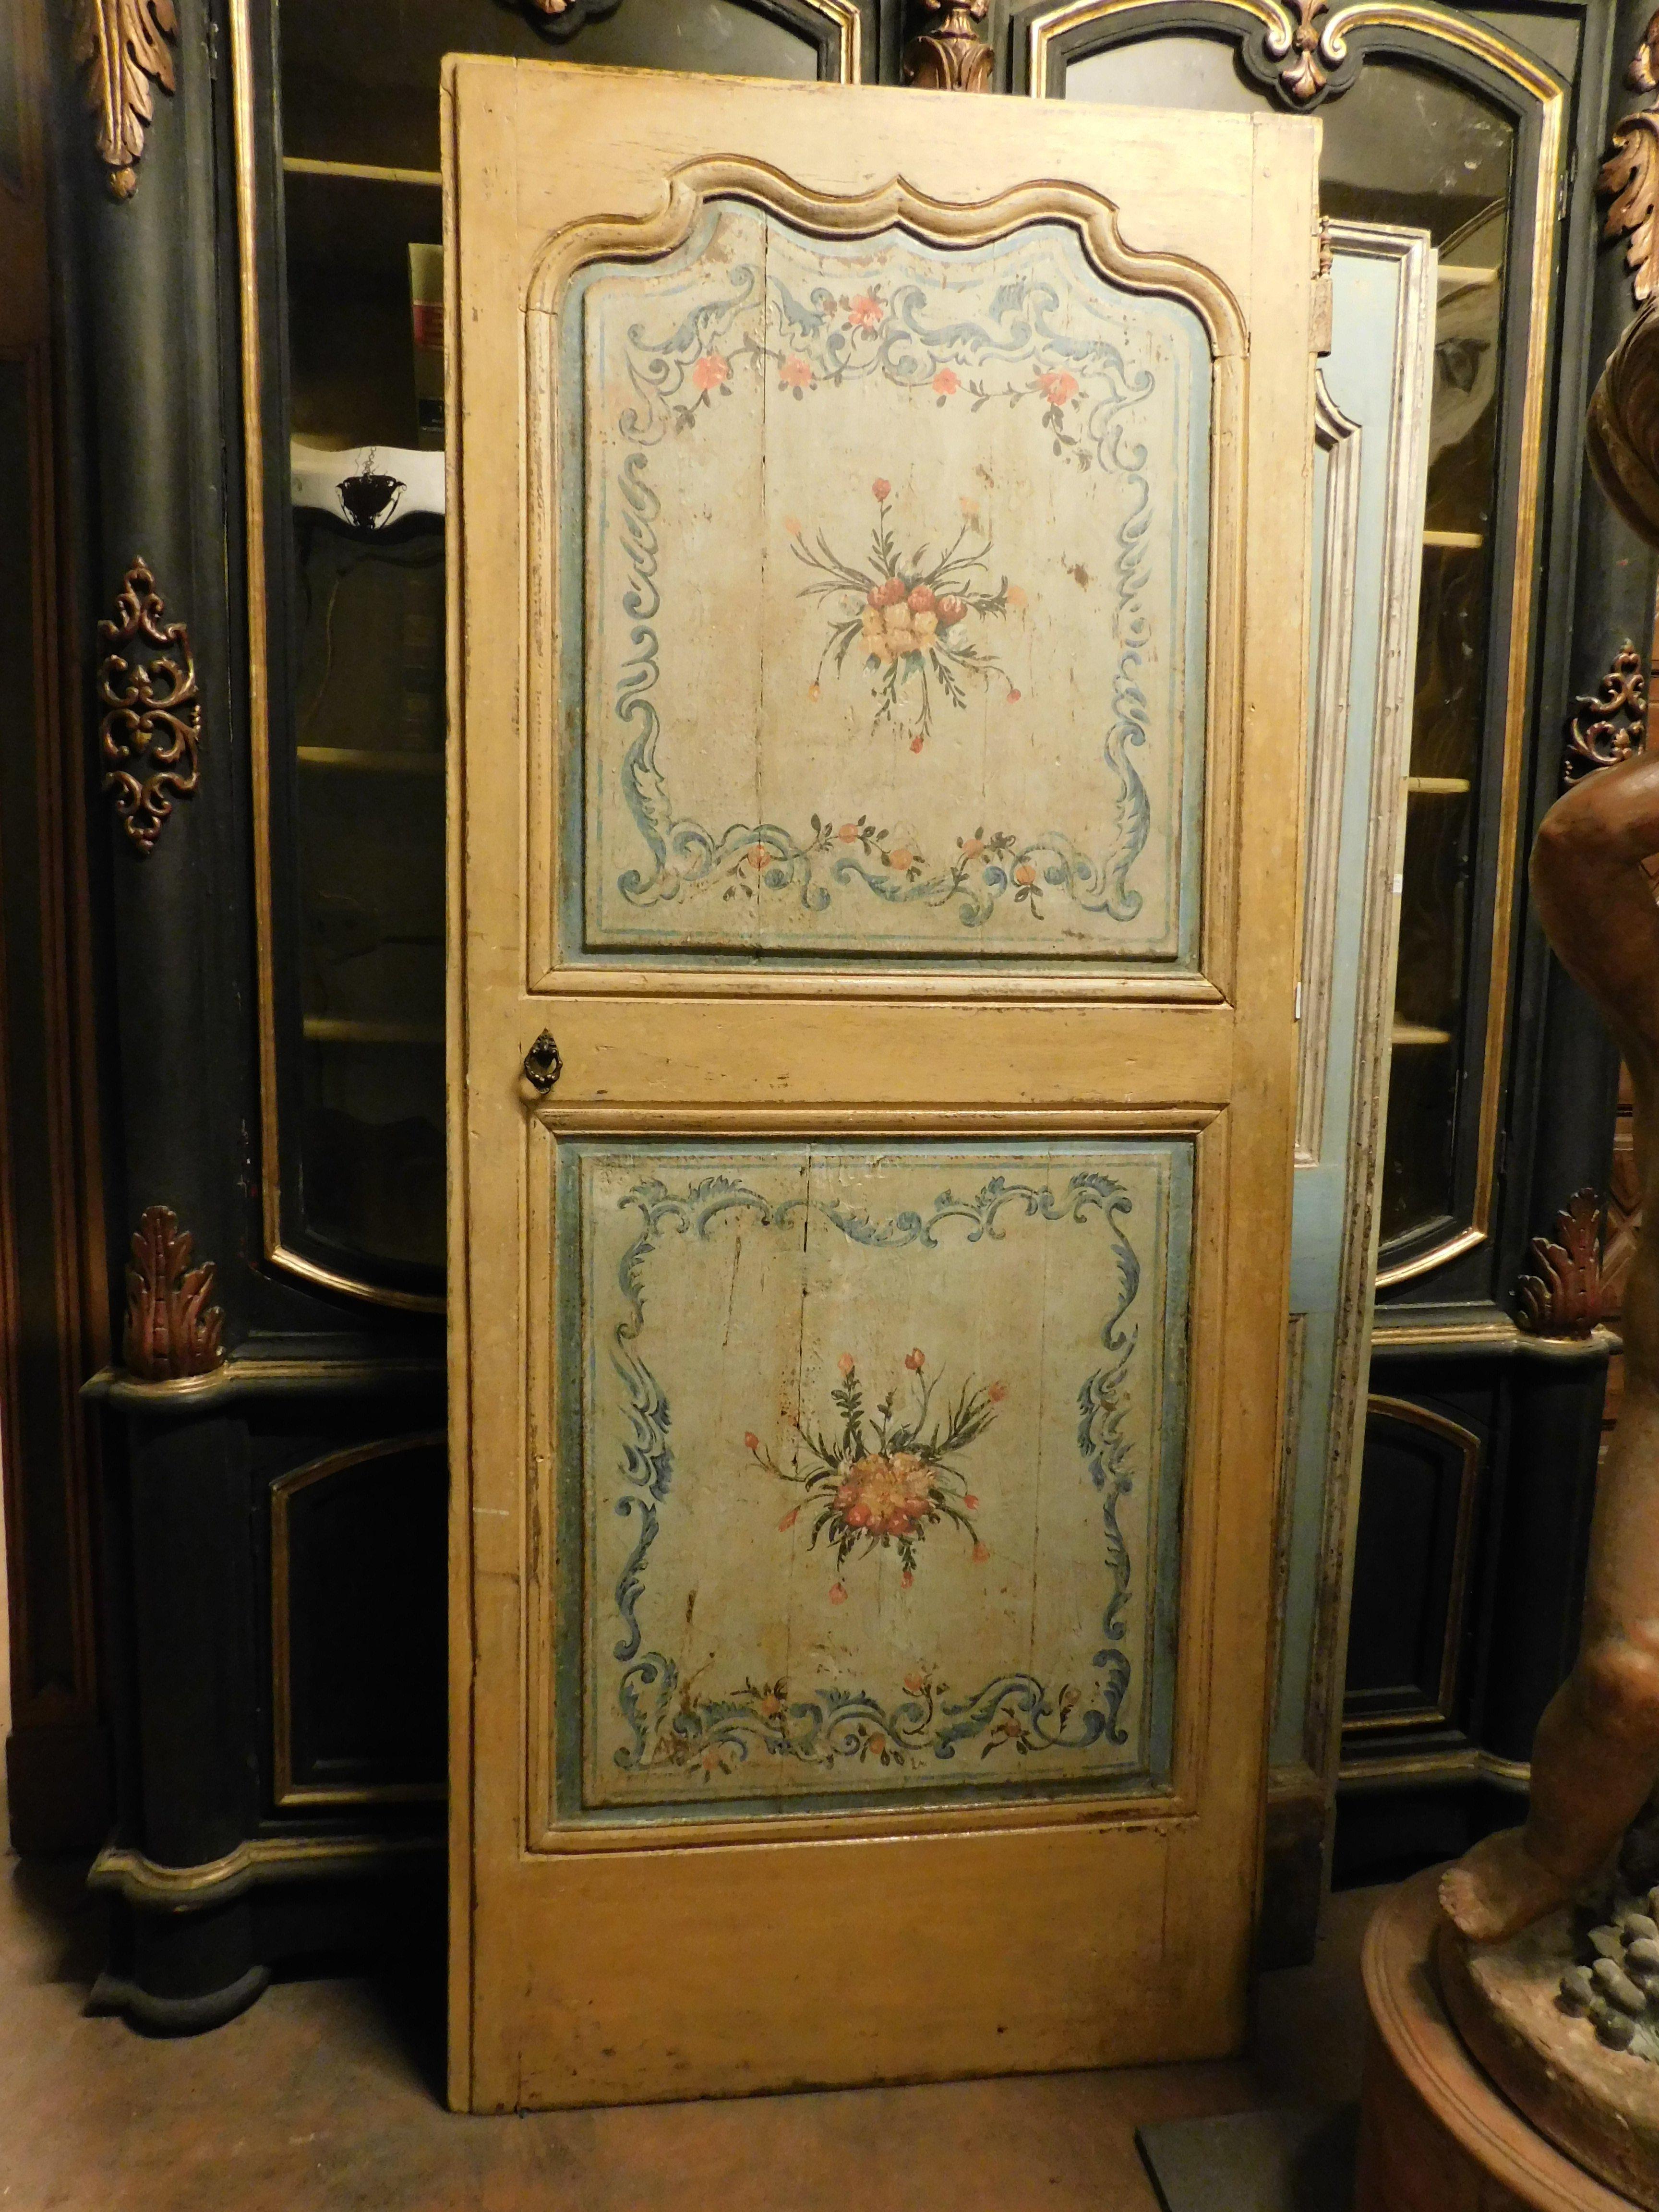 Italian Double-sided lushly painted door with floral themes, 18th century Italy